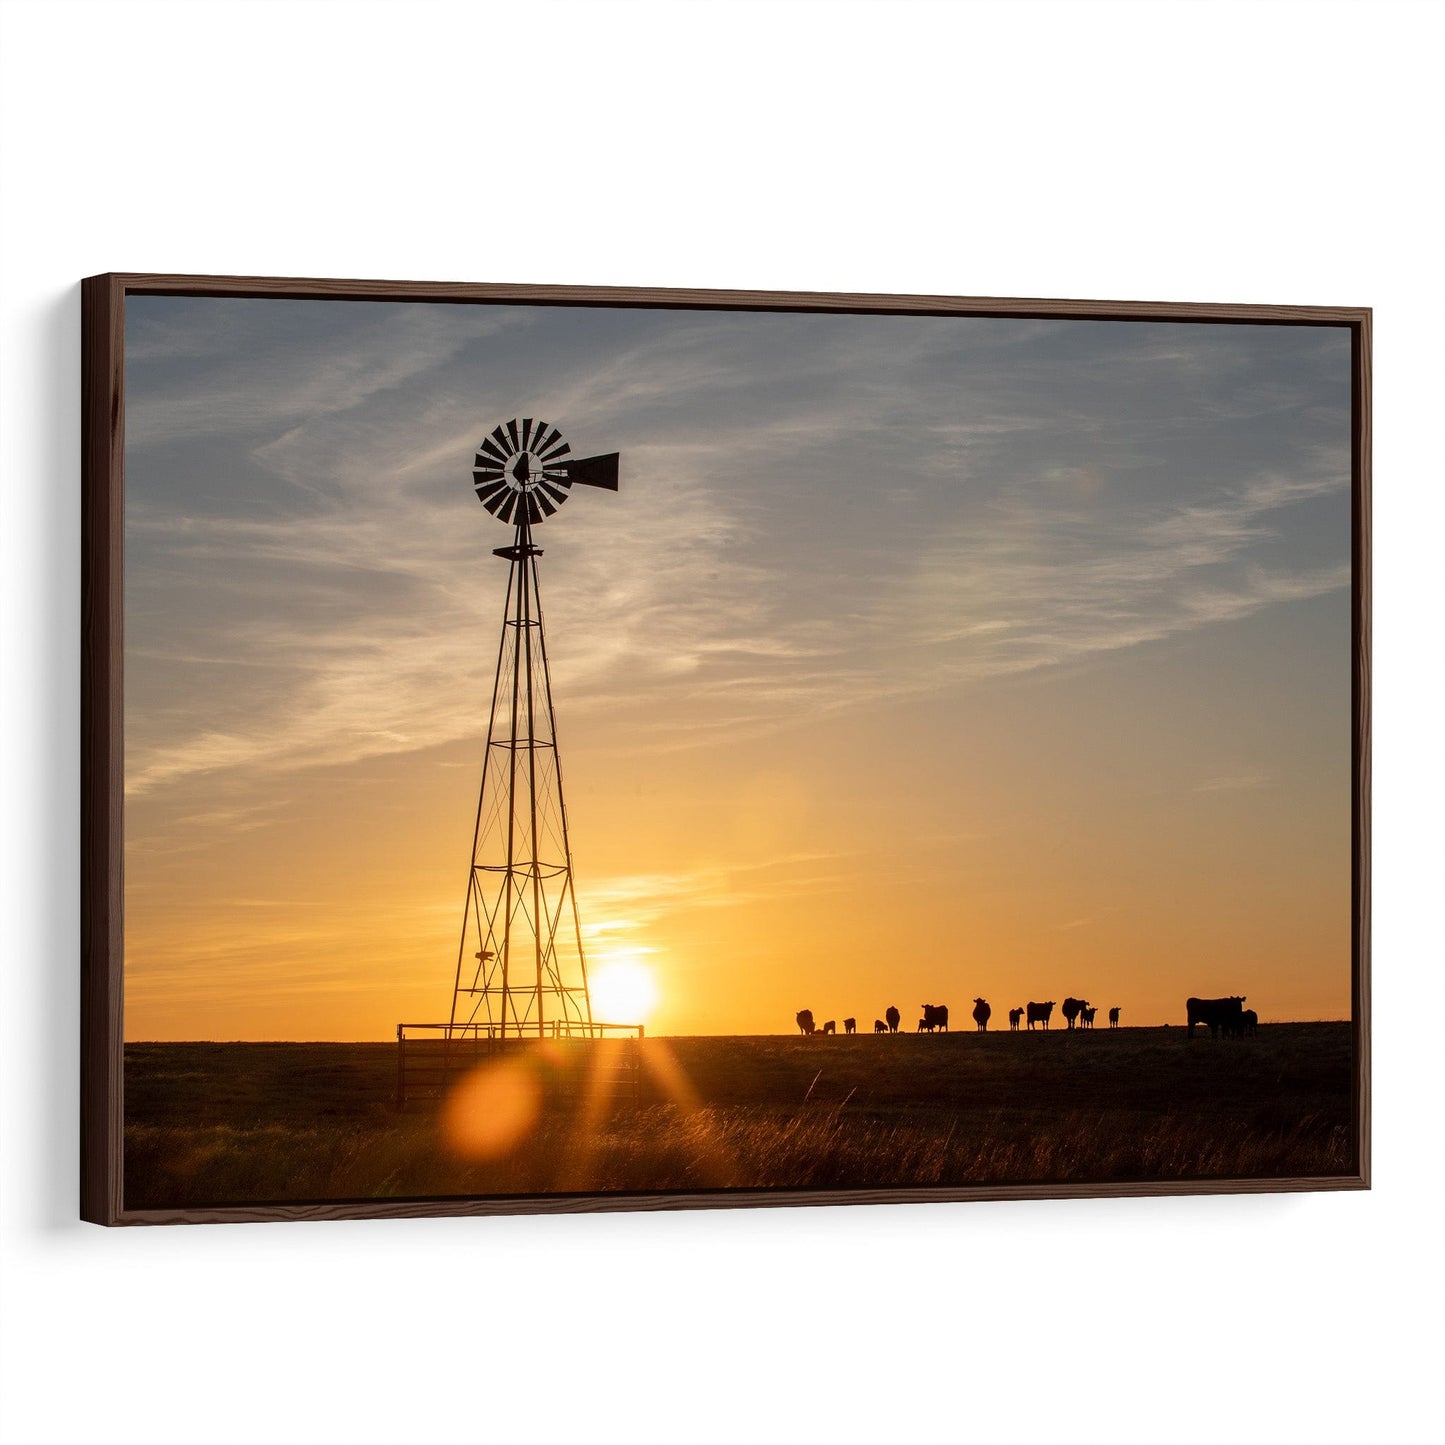 Old Windmill at Sunset with Angus Cattle Canvas-Walnut Frame / 12 x 18 Inches Wall Art Teri James Photography